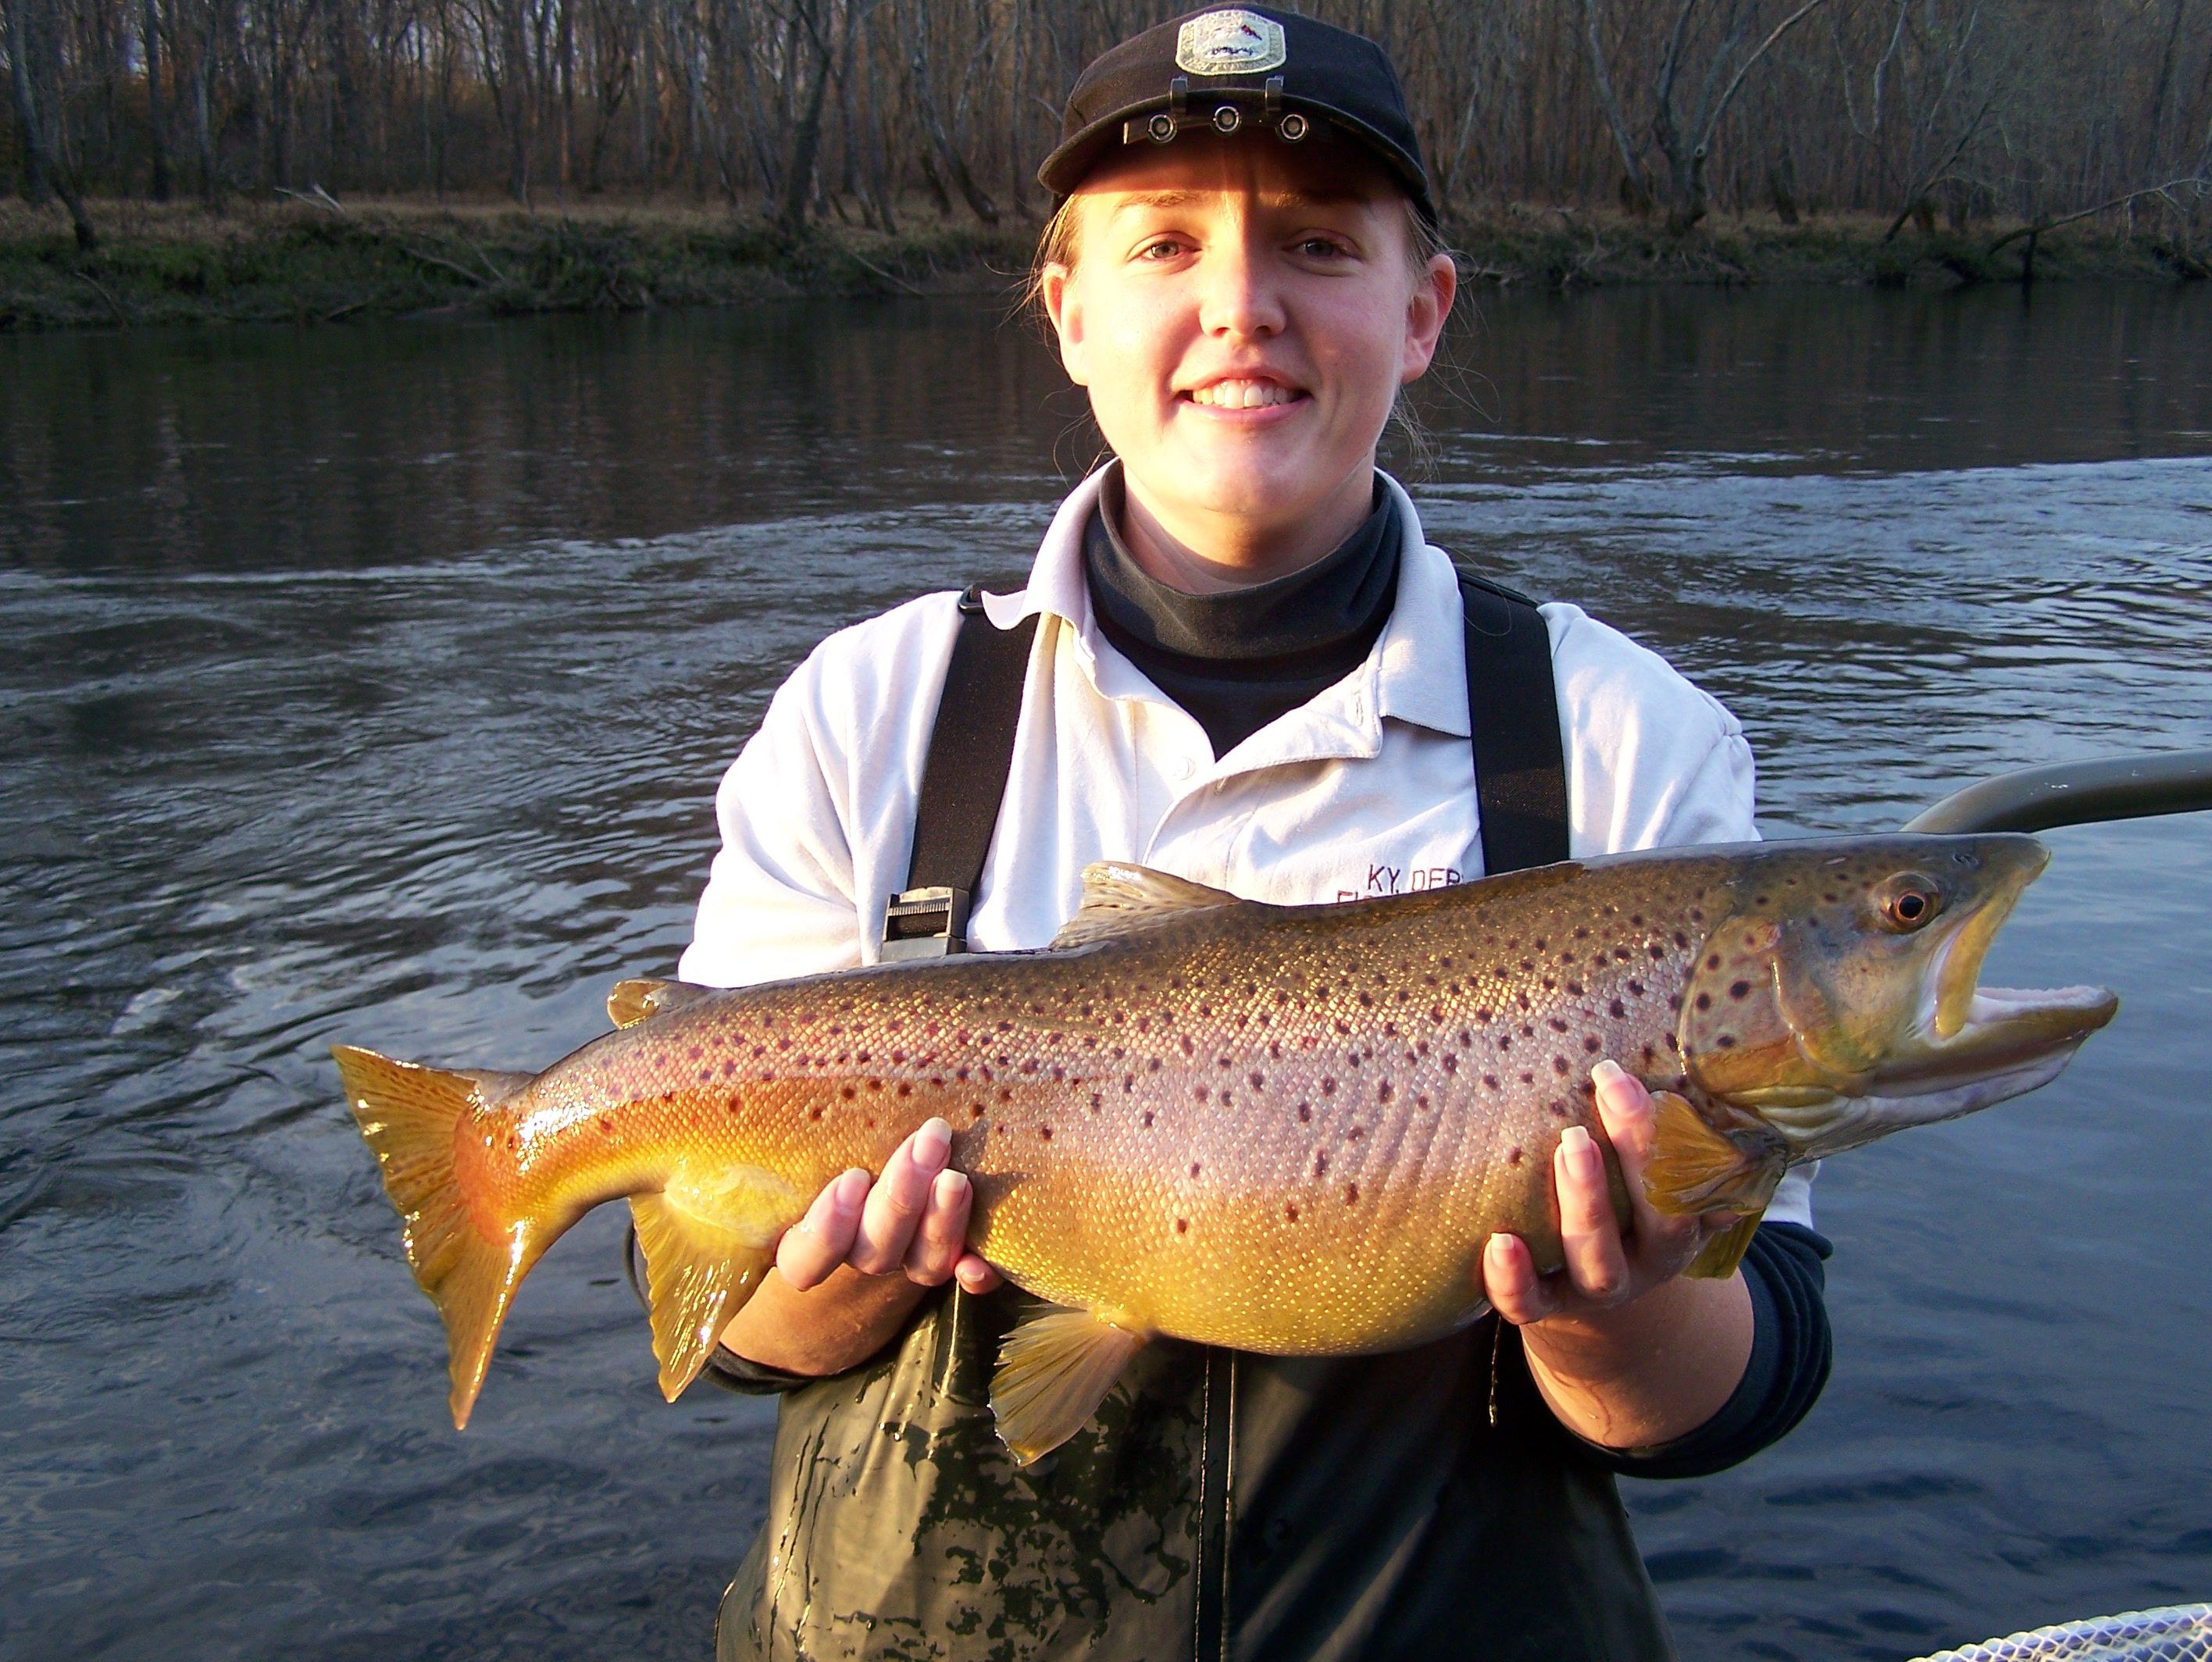 Marcy Anderson, Southeastern Fisheries District biologist for Kentucky Fish and Wildlife, holds an impressive brown trout